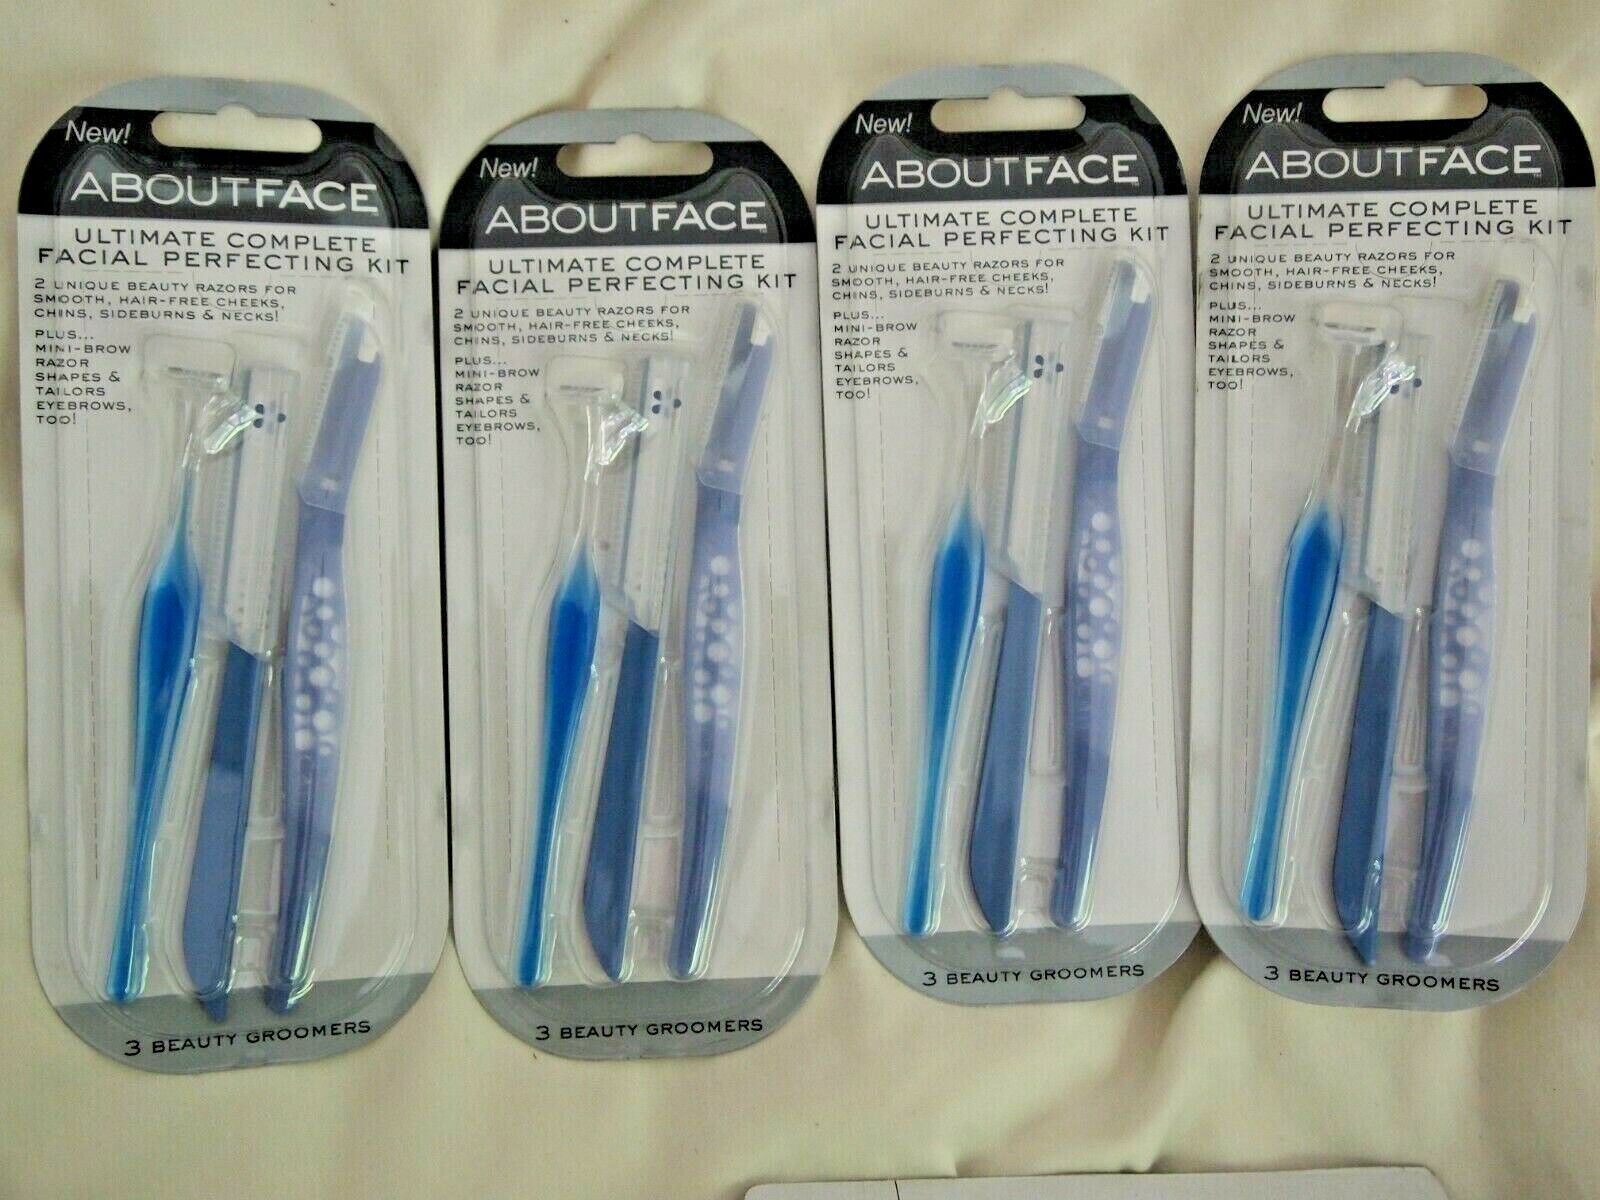 AboutFace by Kai Japan Facial Razor Kit  4 Packs of 3 Shavers  12 Total AboutFace Does Not Apply